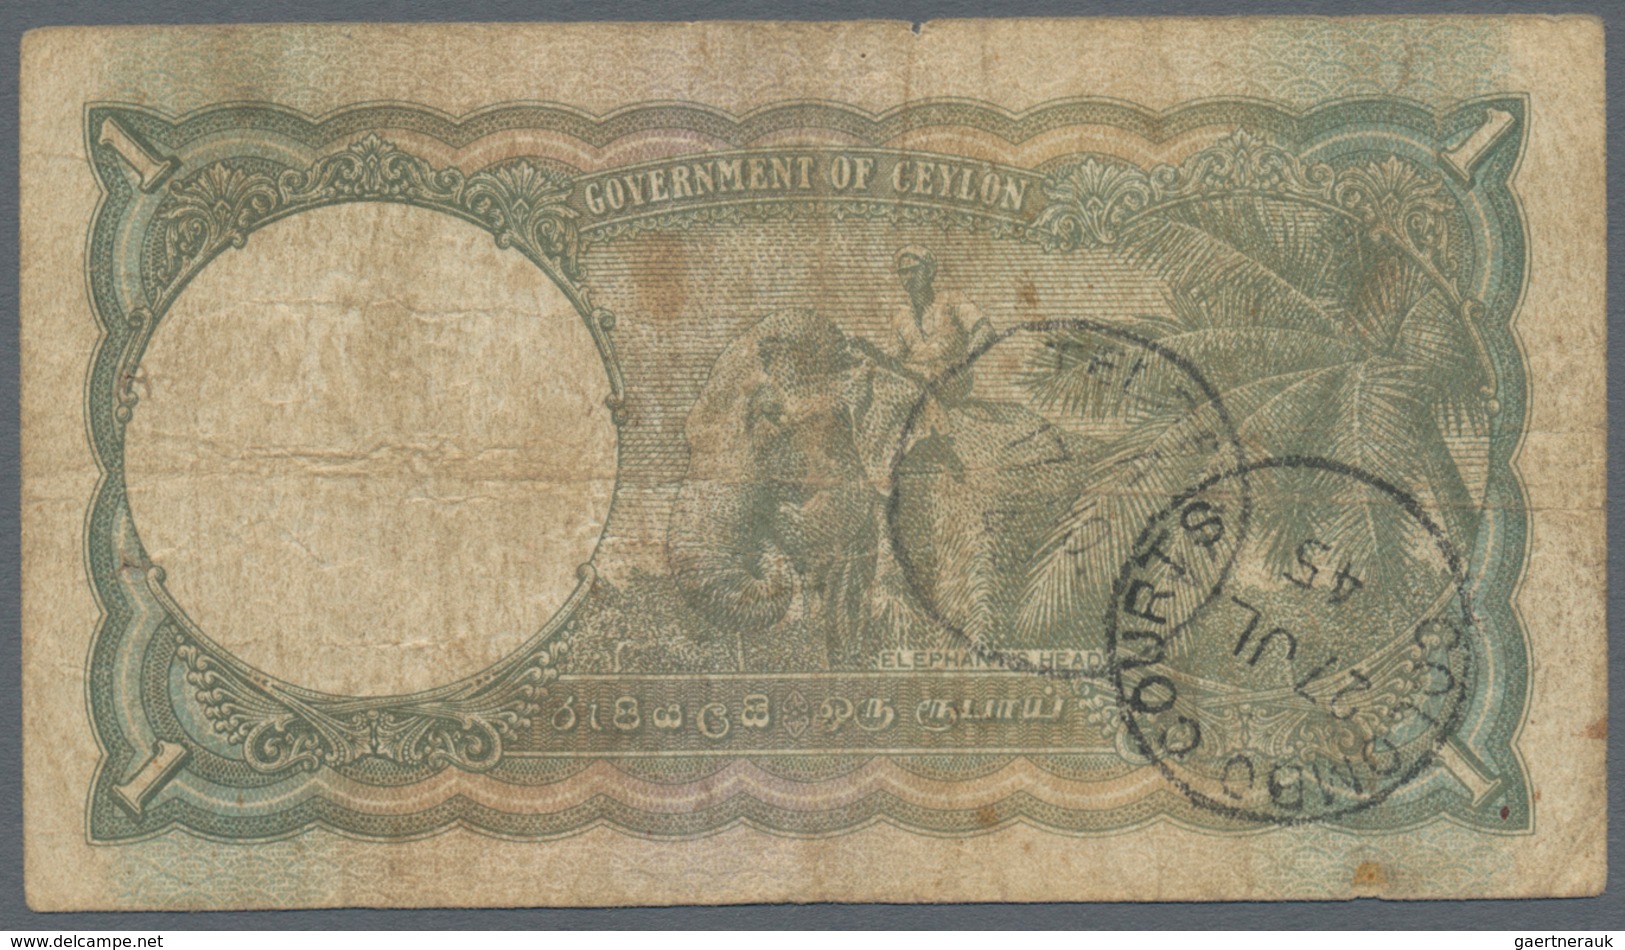 Ceylon: Set Of 3 Notes 1 Rupee Dated 2x 1941 And 1xs 1945 P. 30, 34, All Used With Folds And Stain I - Sri Lanka